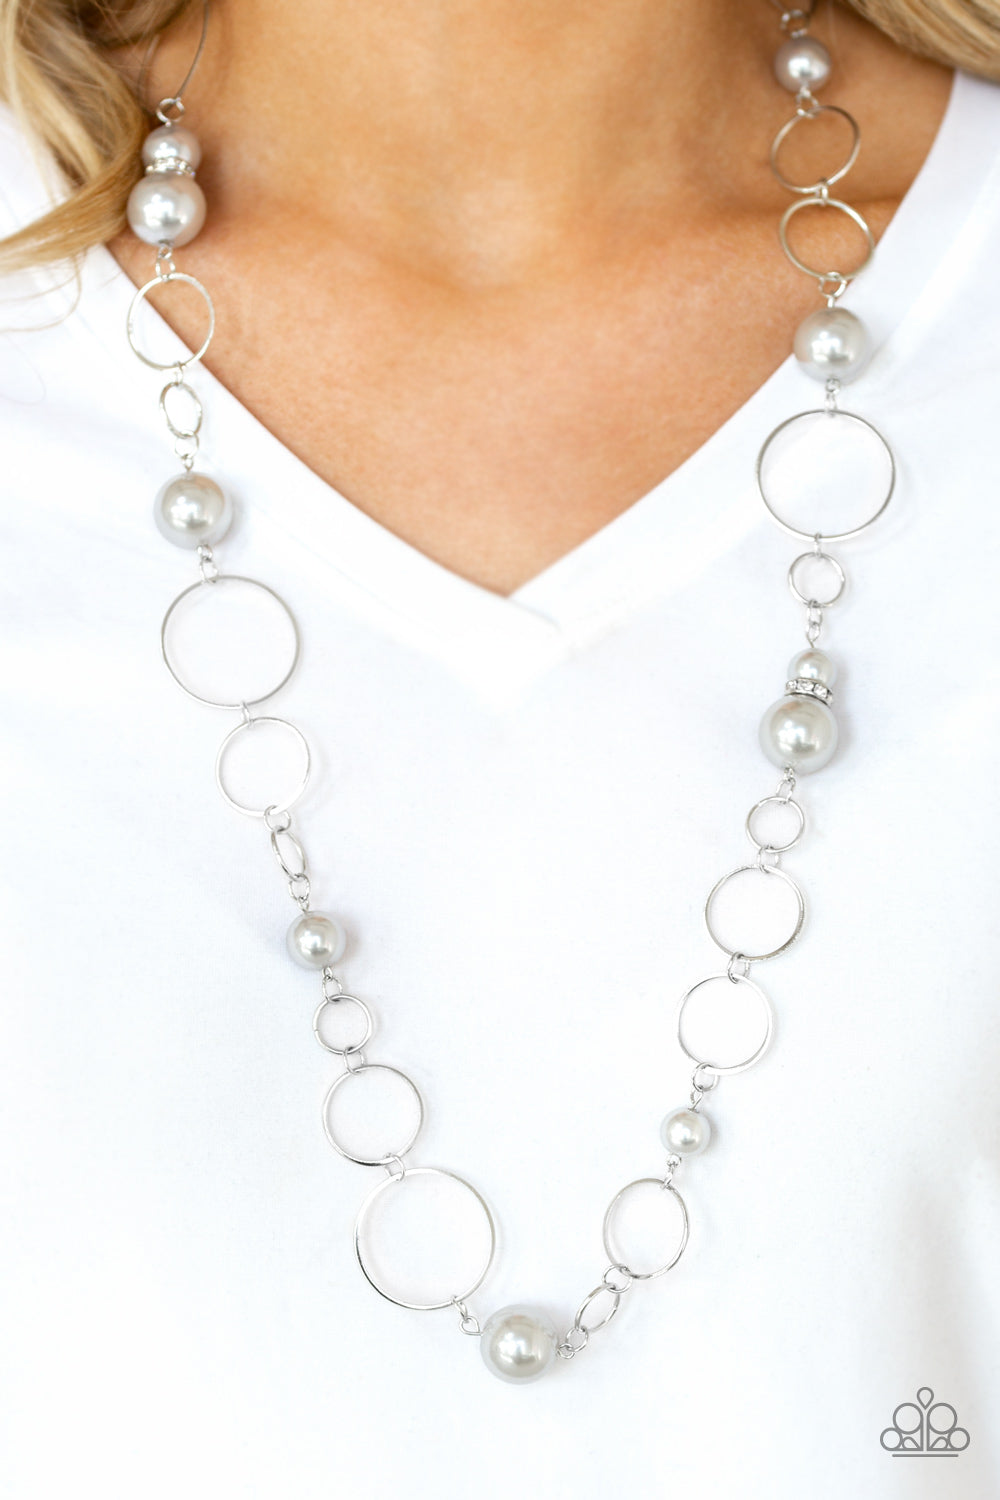 LOVELY LADY LUCK - SILVER GRAY PEARLS NECKLACE